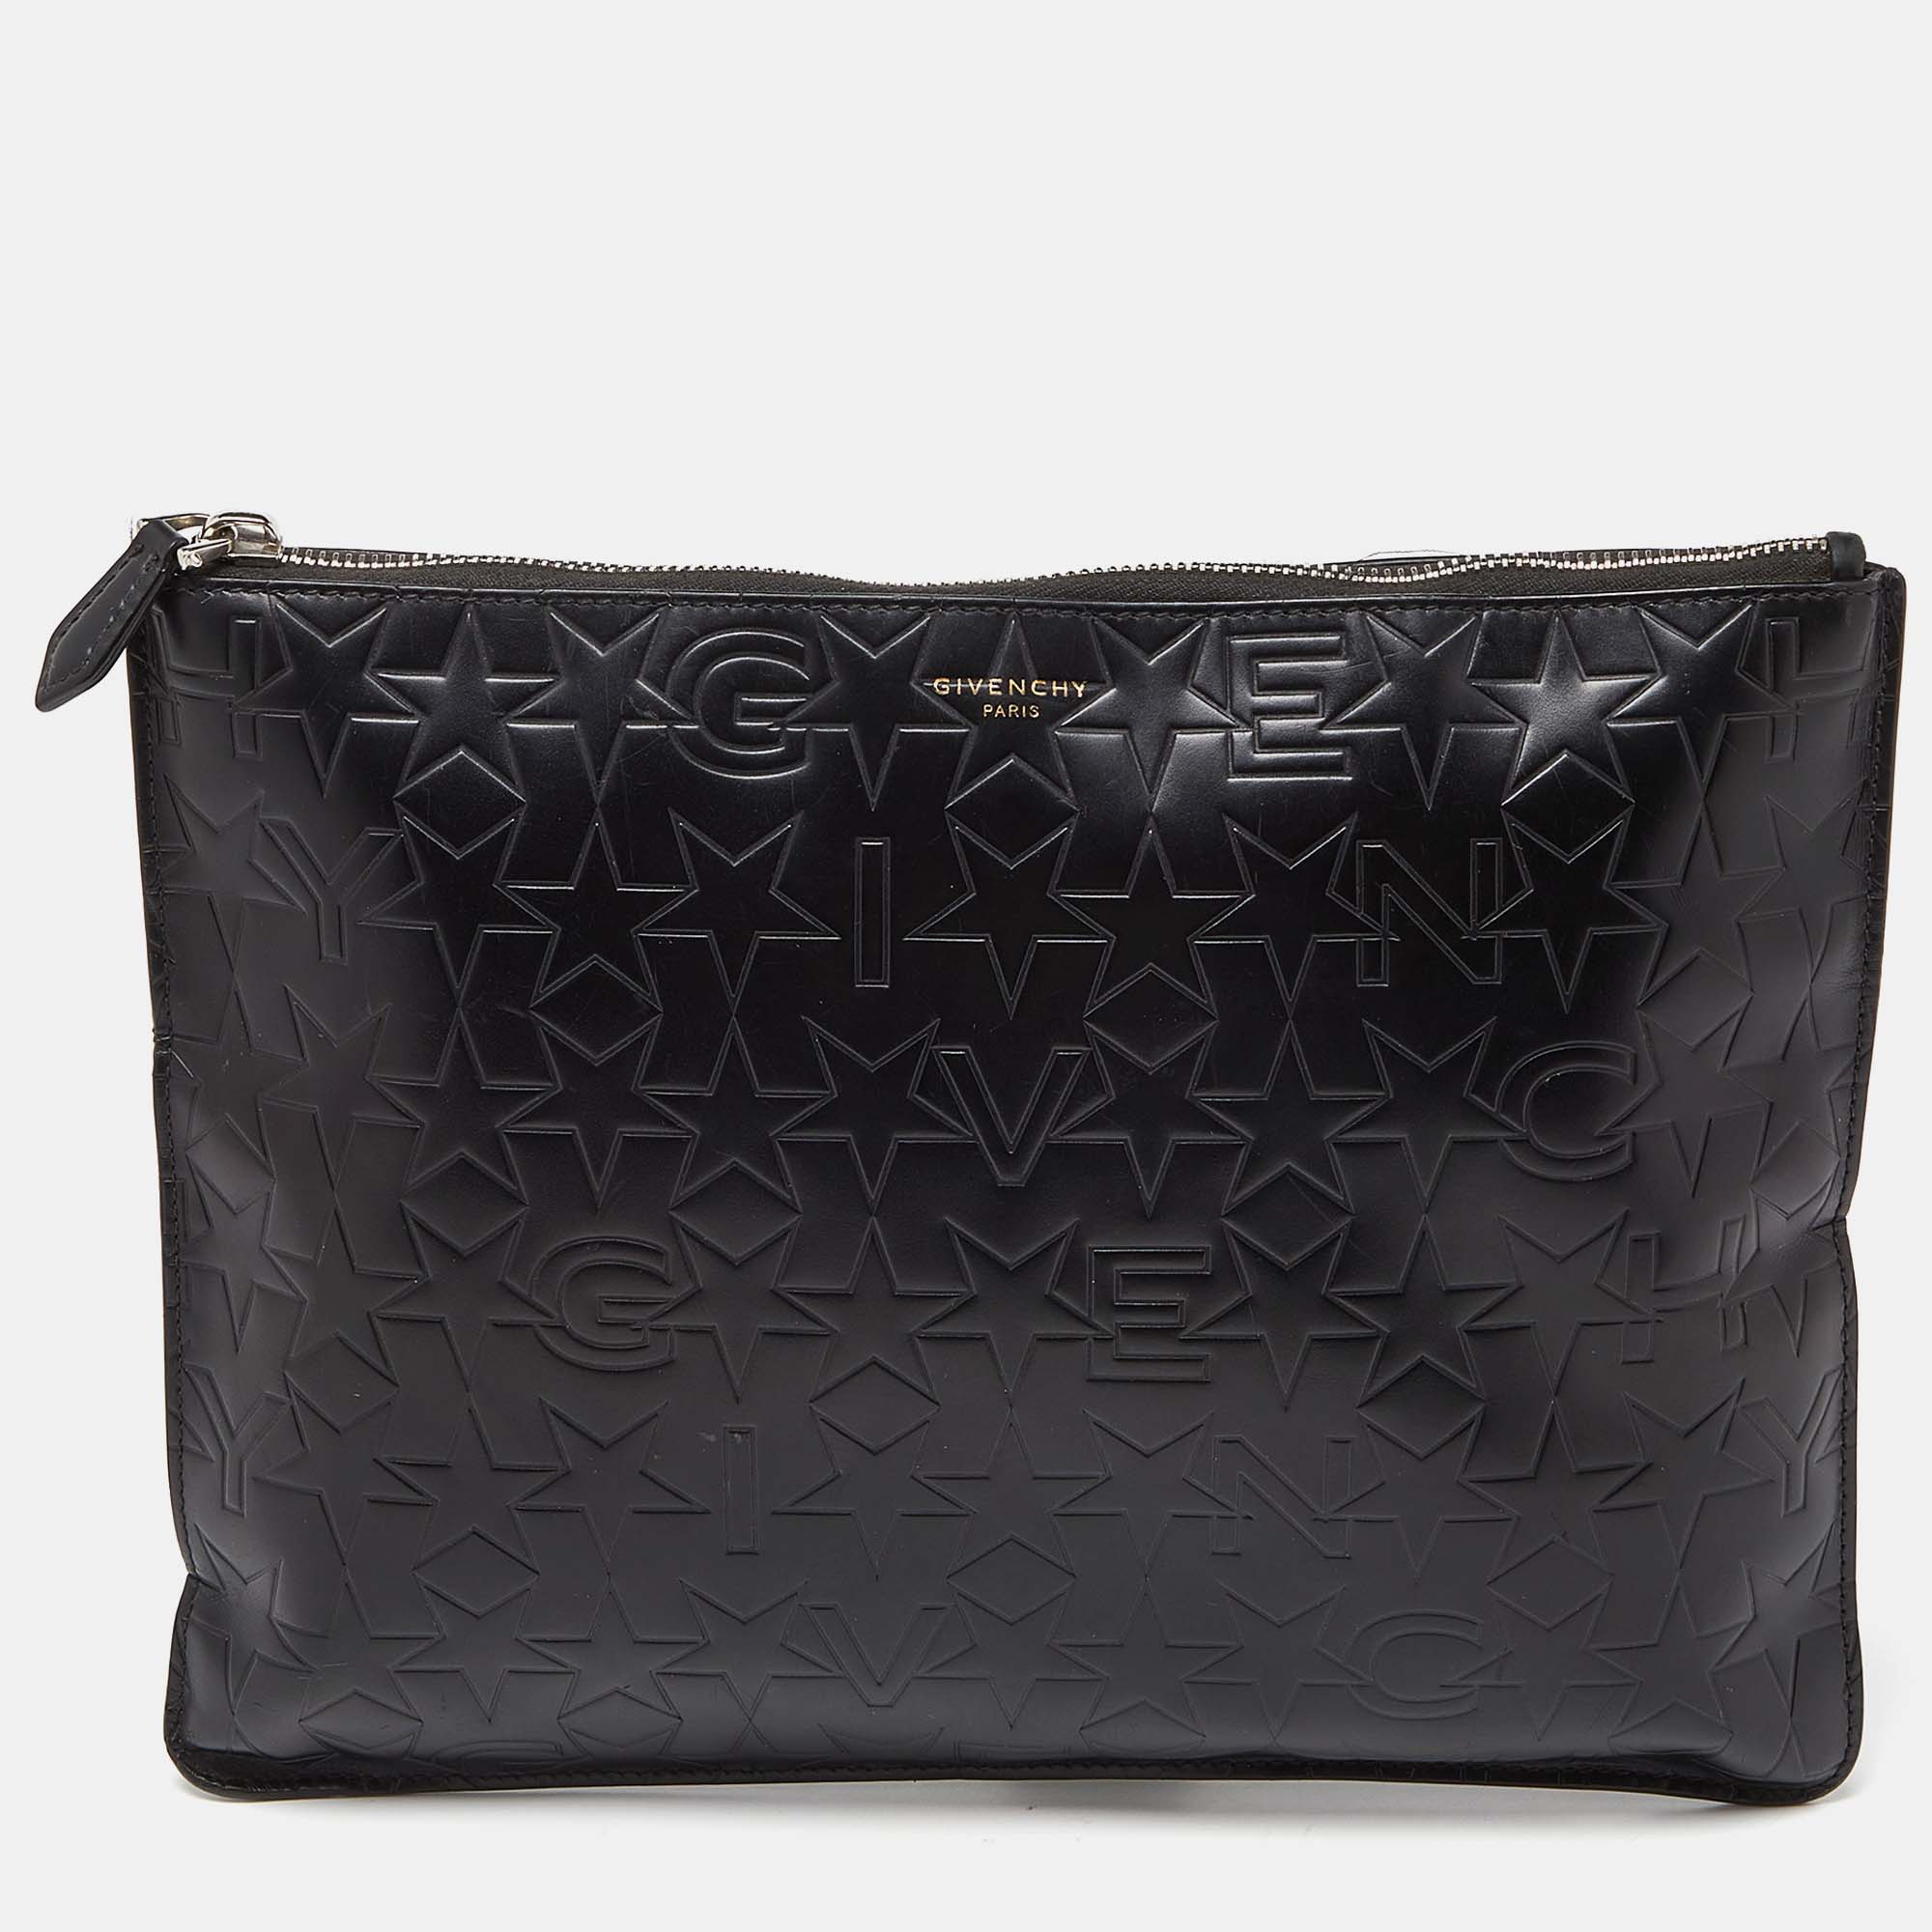 Pre-owned Givenchy Black Star Embossed Leather Zip Clutch